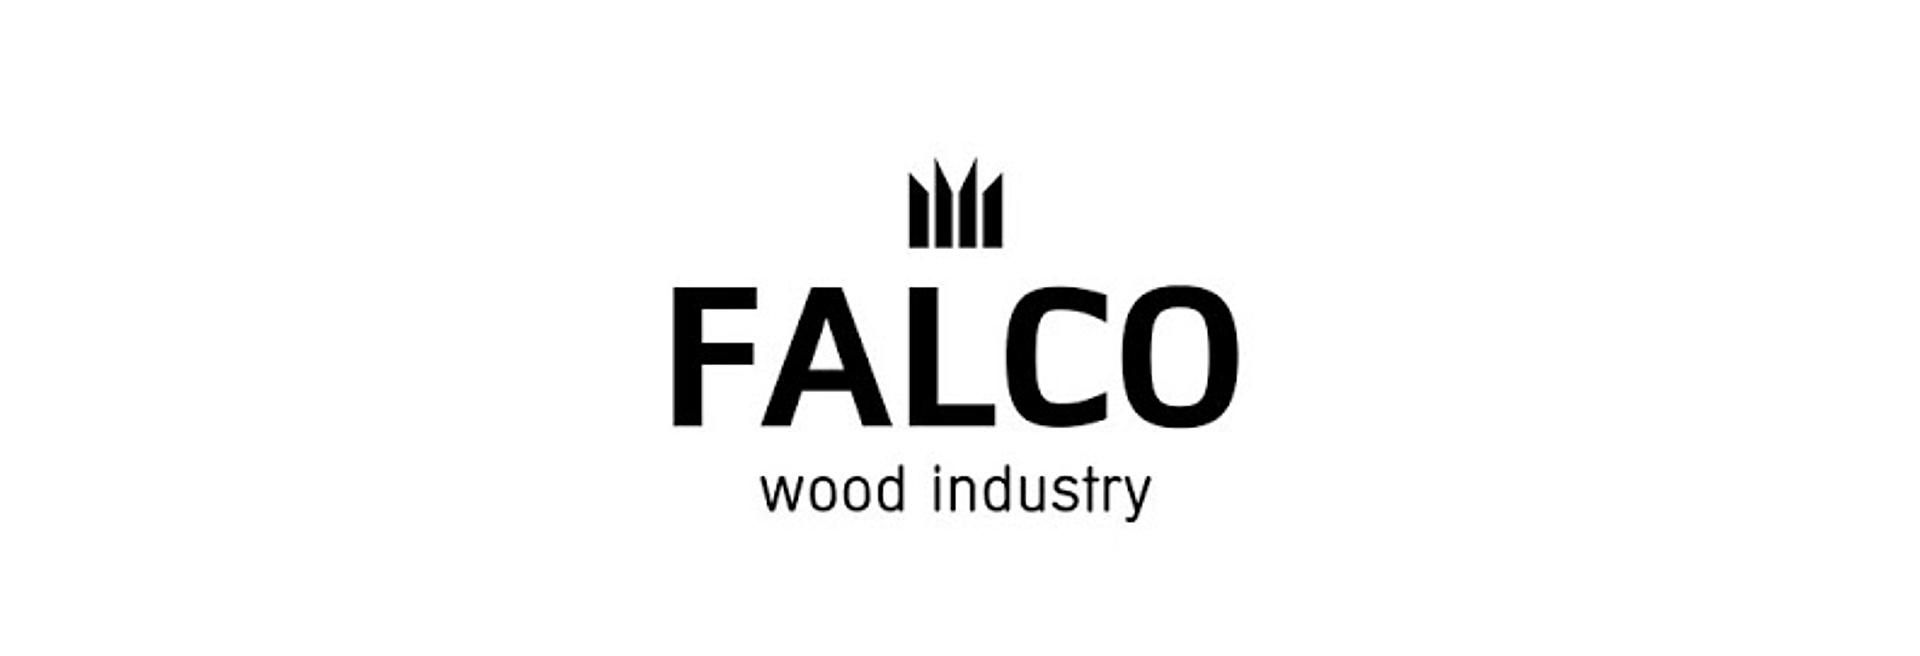 Falco Zrt. invests to increase capacity for construction industry products